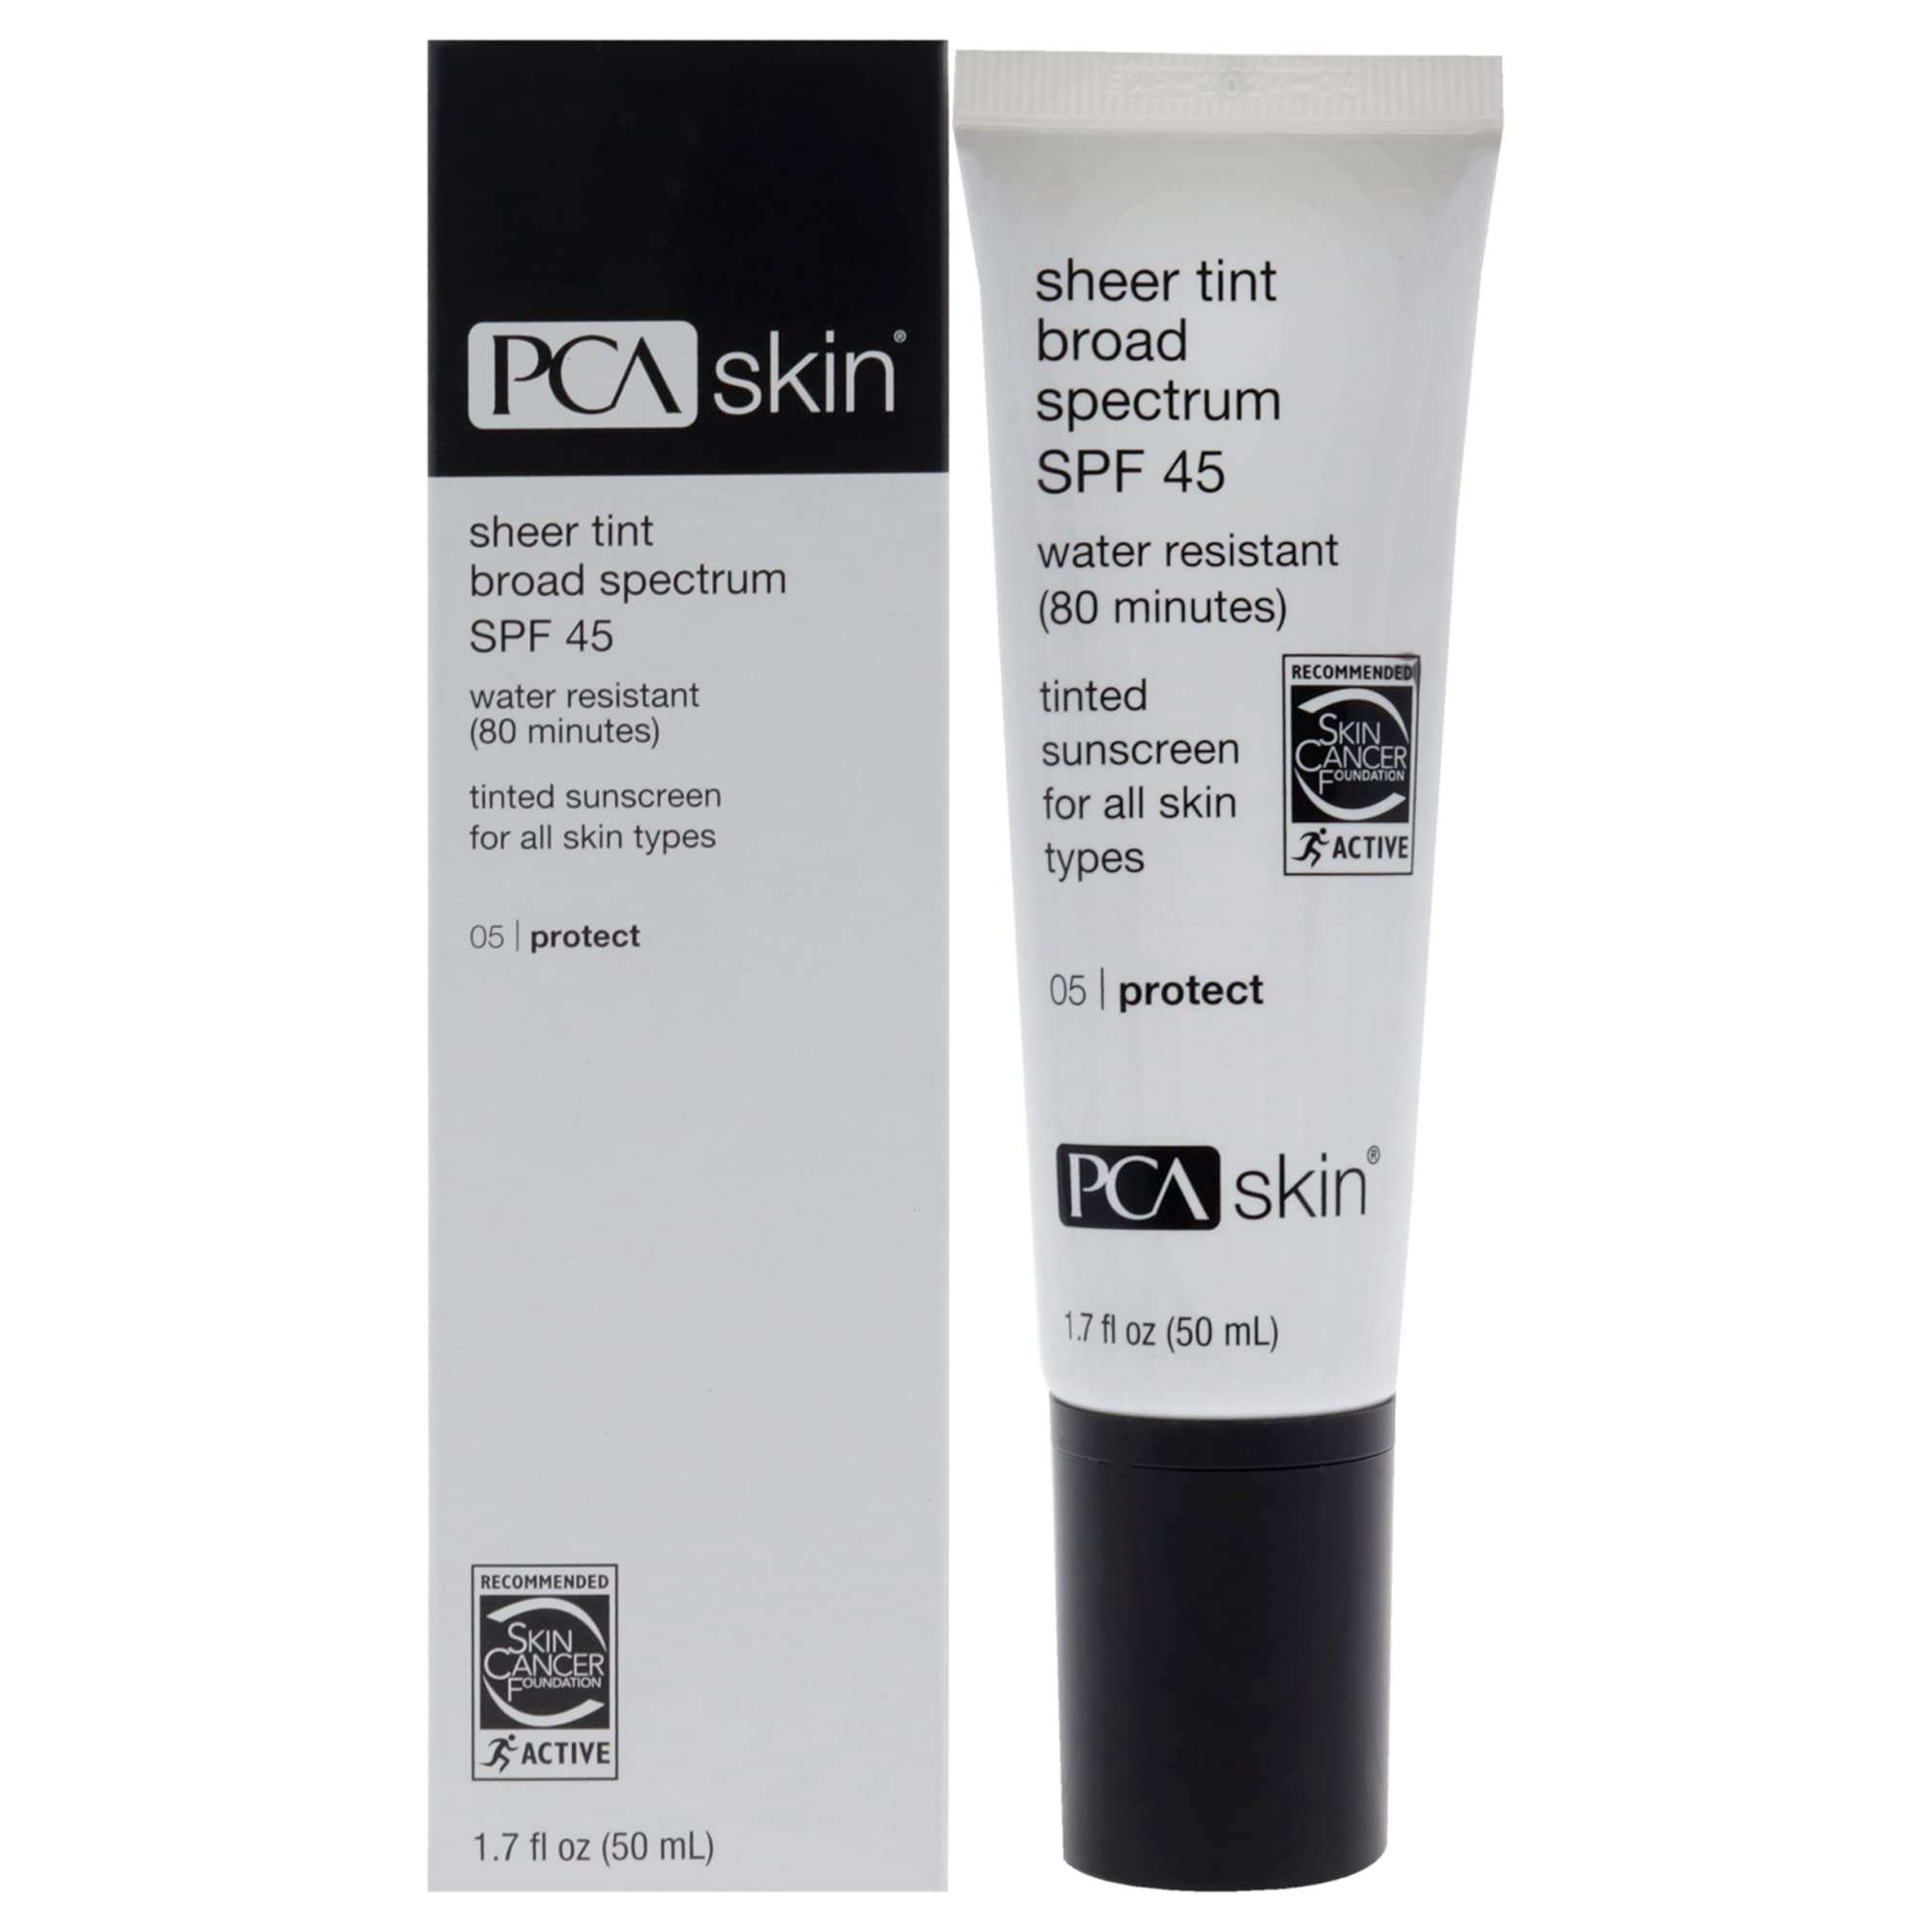 PCA SKIN Sheer Tint Broad Spectrum SPF 45 - Universally-Tinted Water-Resistant Hydrating Sunscreen for Use Alone or Under Foundation & Makeup (1.7 fl oz)